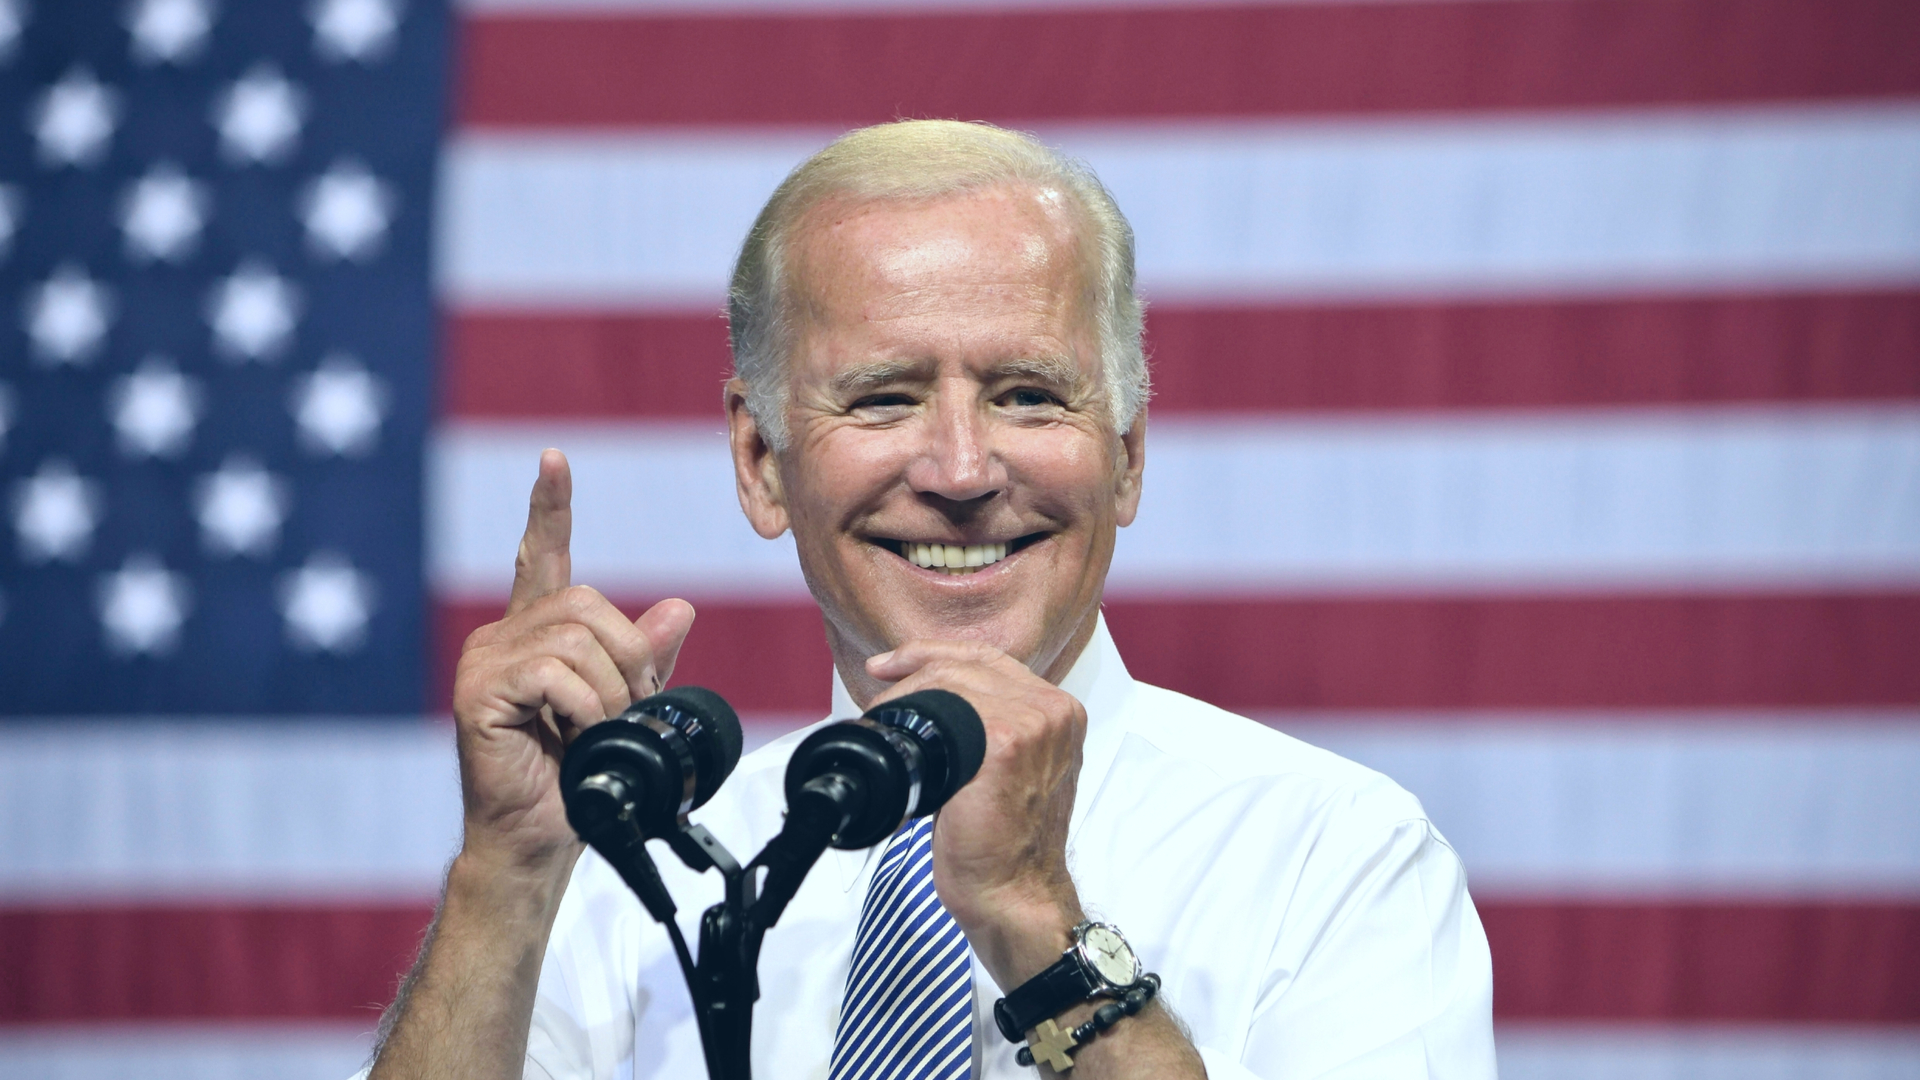 Just how rich are President Joe Biden and these other big names?